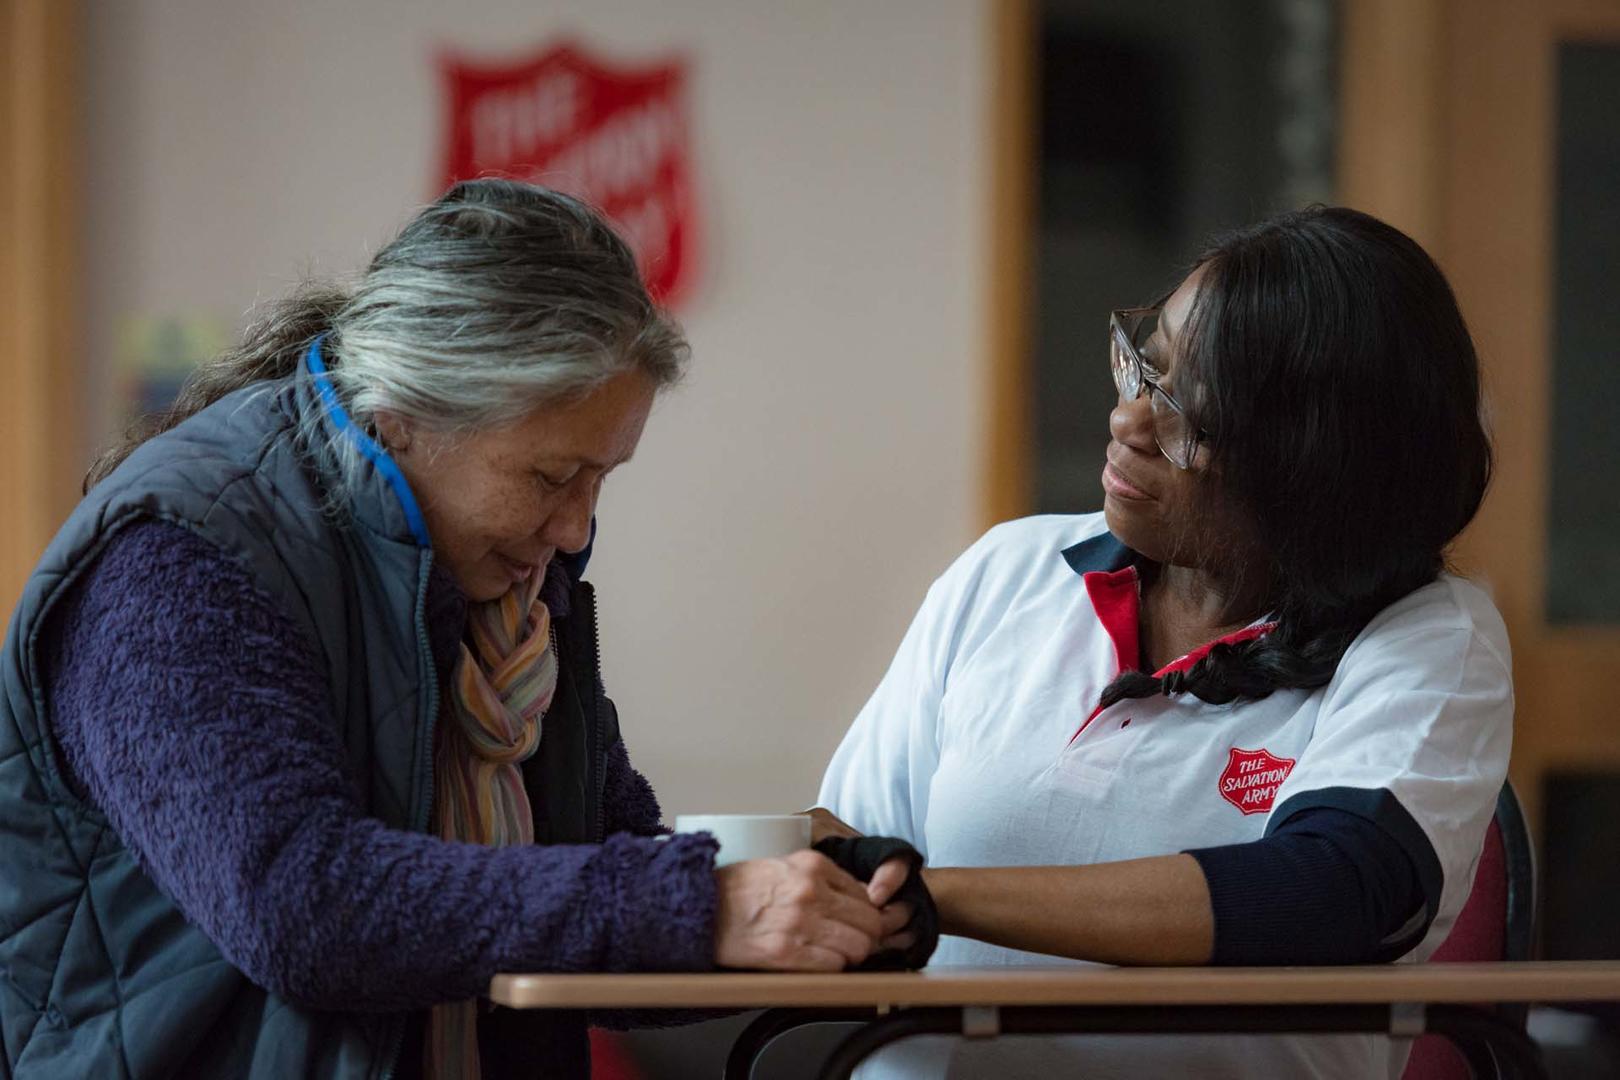 Two women are say together at a table. One woman, who is wear a Salvation Army polo shirt places her hand on the hands of the other women in reassurance.